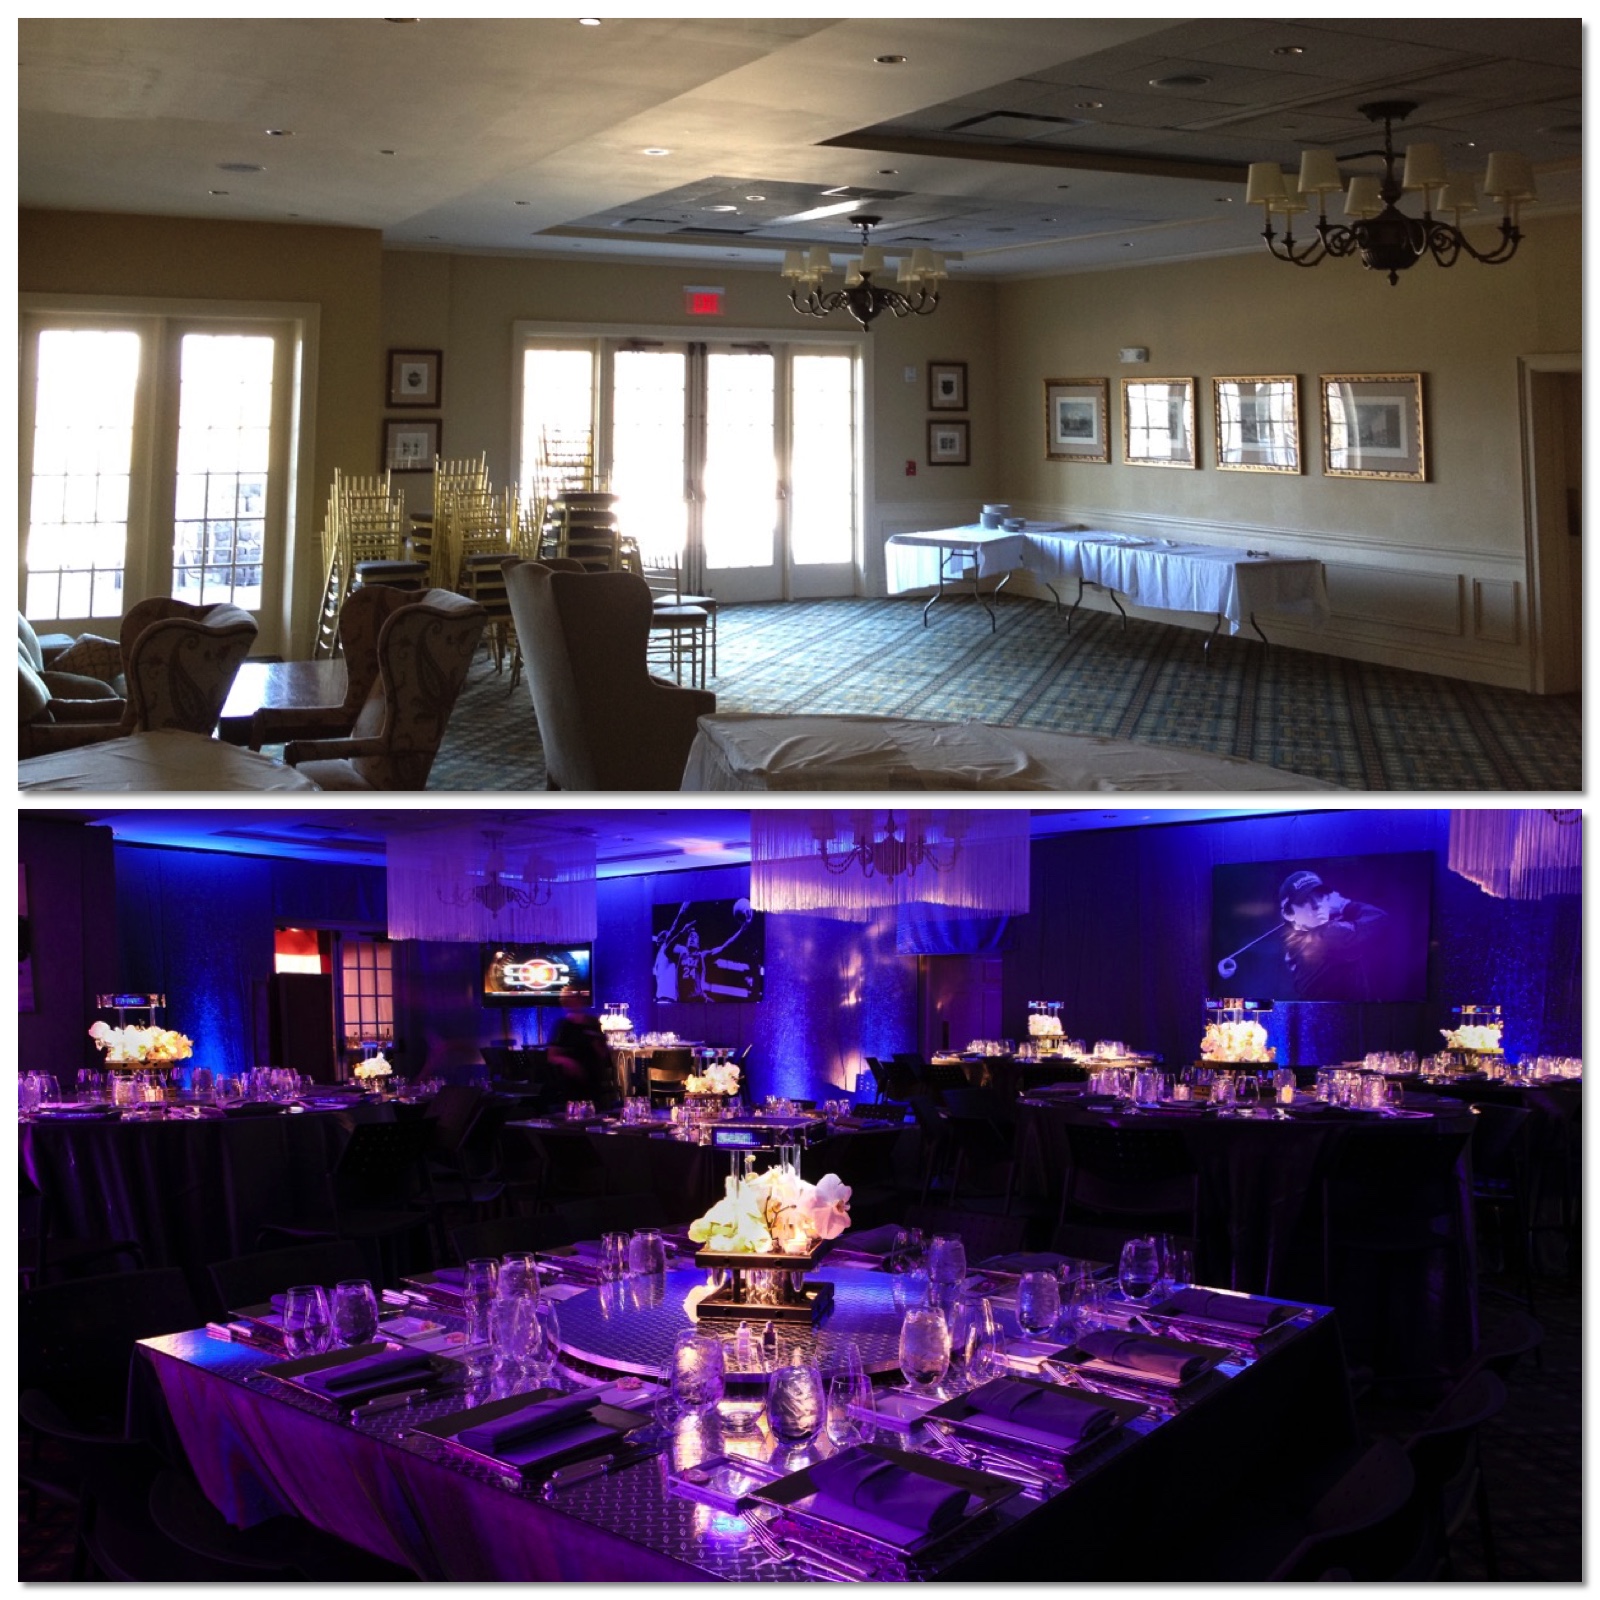 Greenbrook Country Club SportsCenter Theme Bar Mitzvah Design Before and After - Eggsotic Events NJ NYC Event Design Lighting Decor Drape Rental NJ NYC .jpg